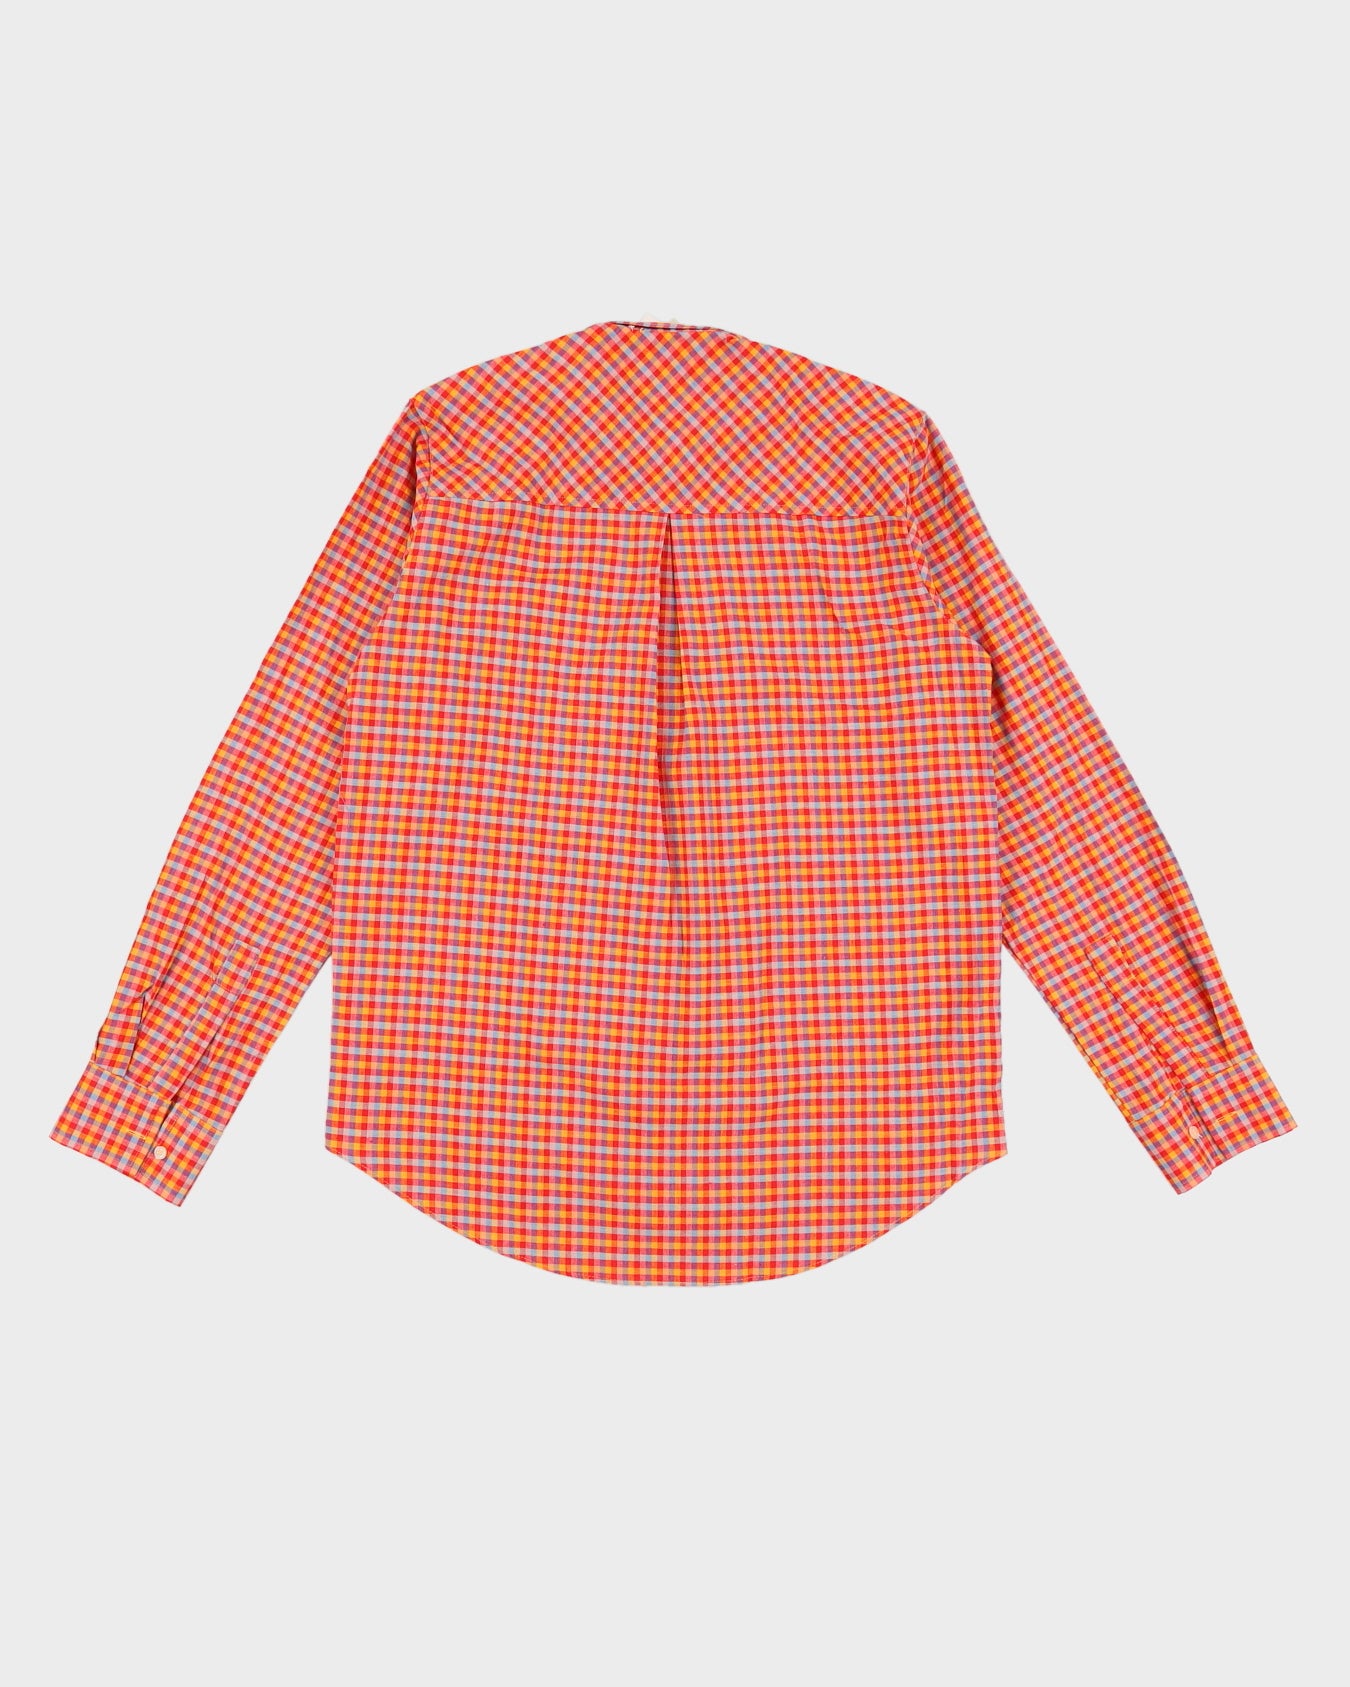 Vintage 70s Benetton Red / Orange Checked Long Sleeved Shirt Deadstock With Tags - M